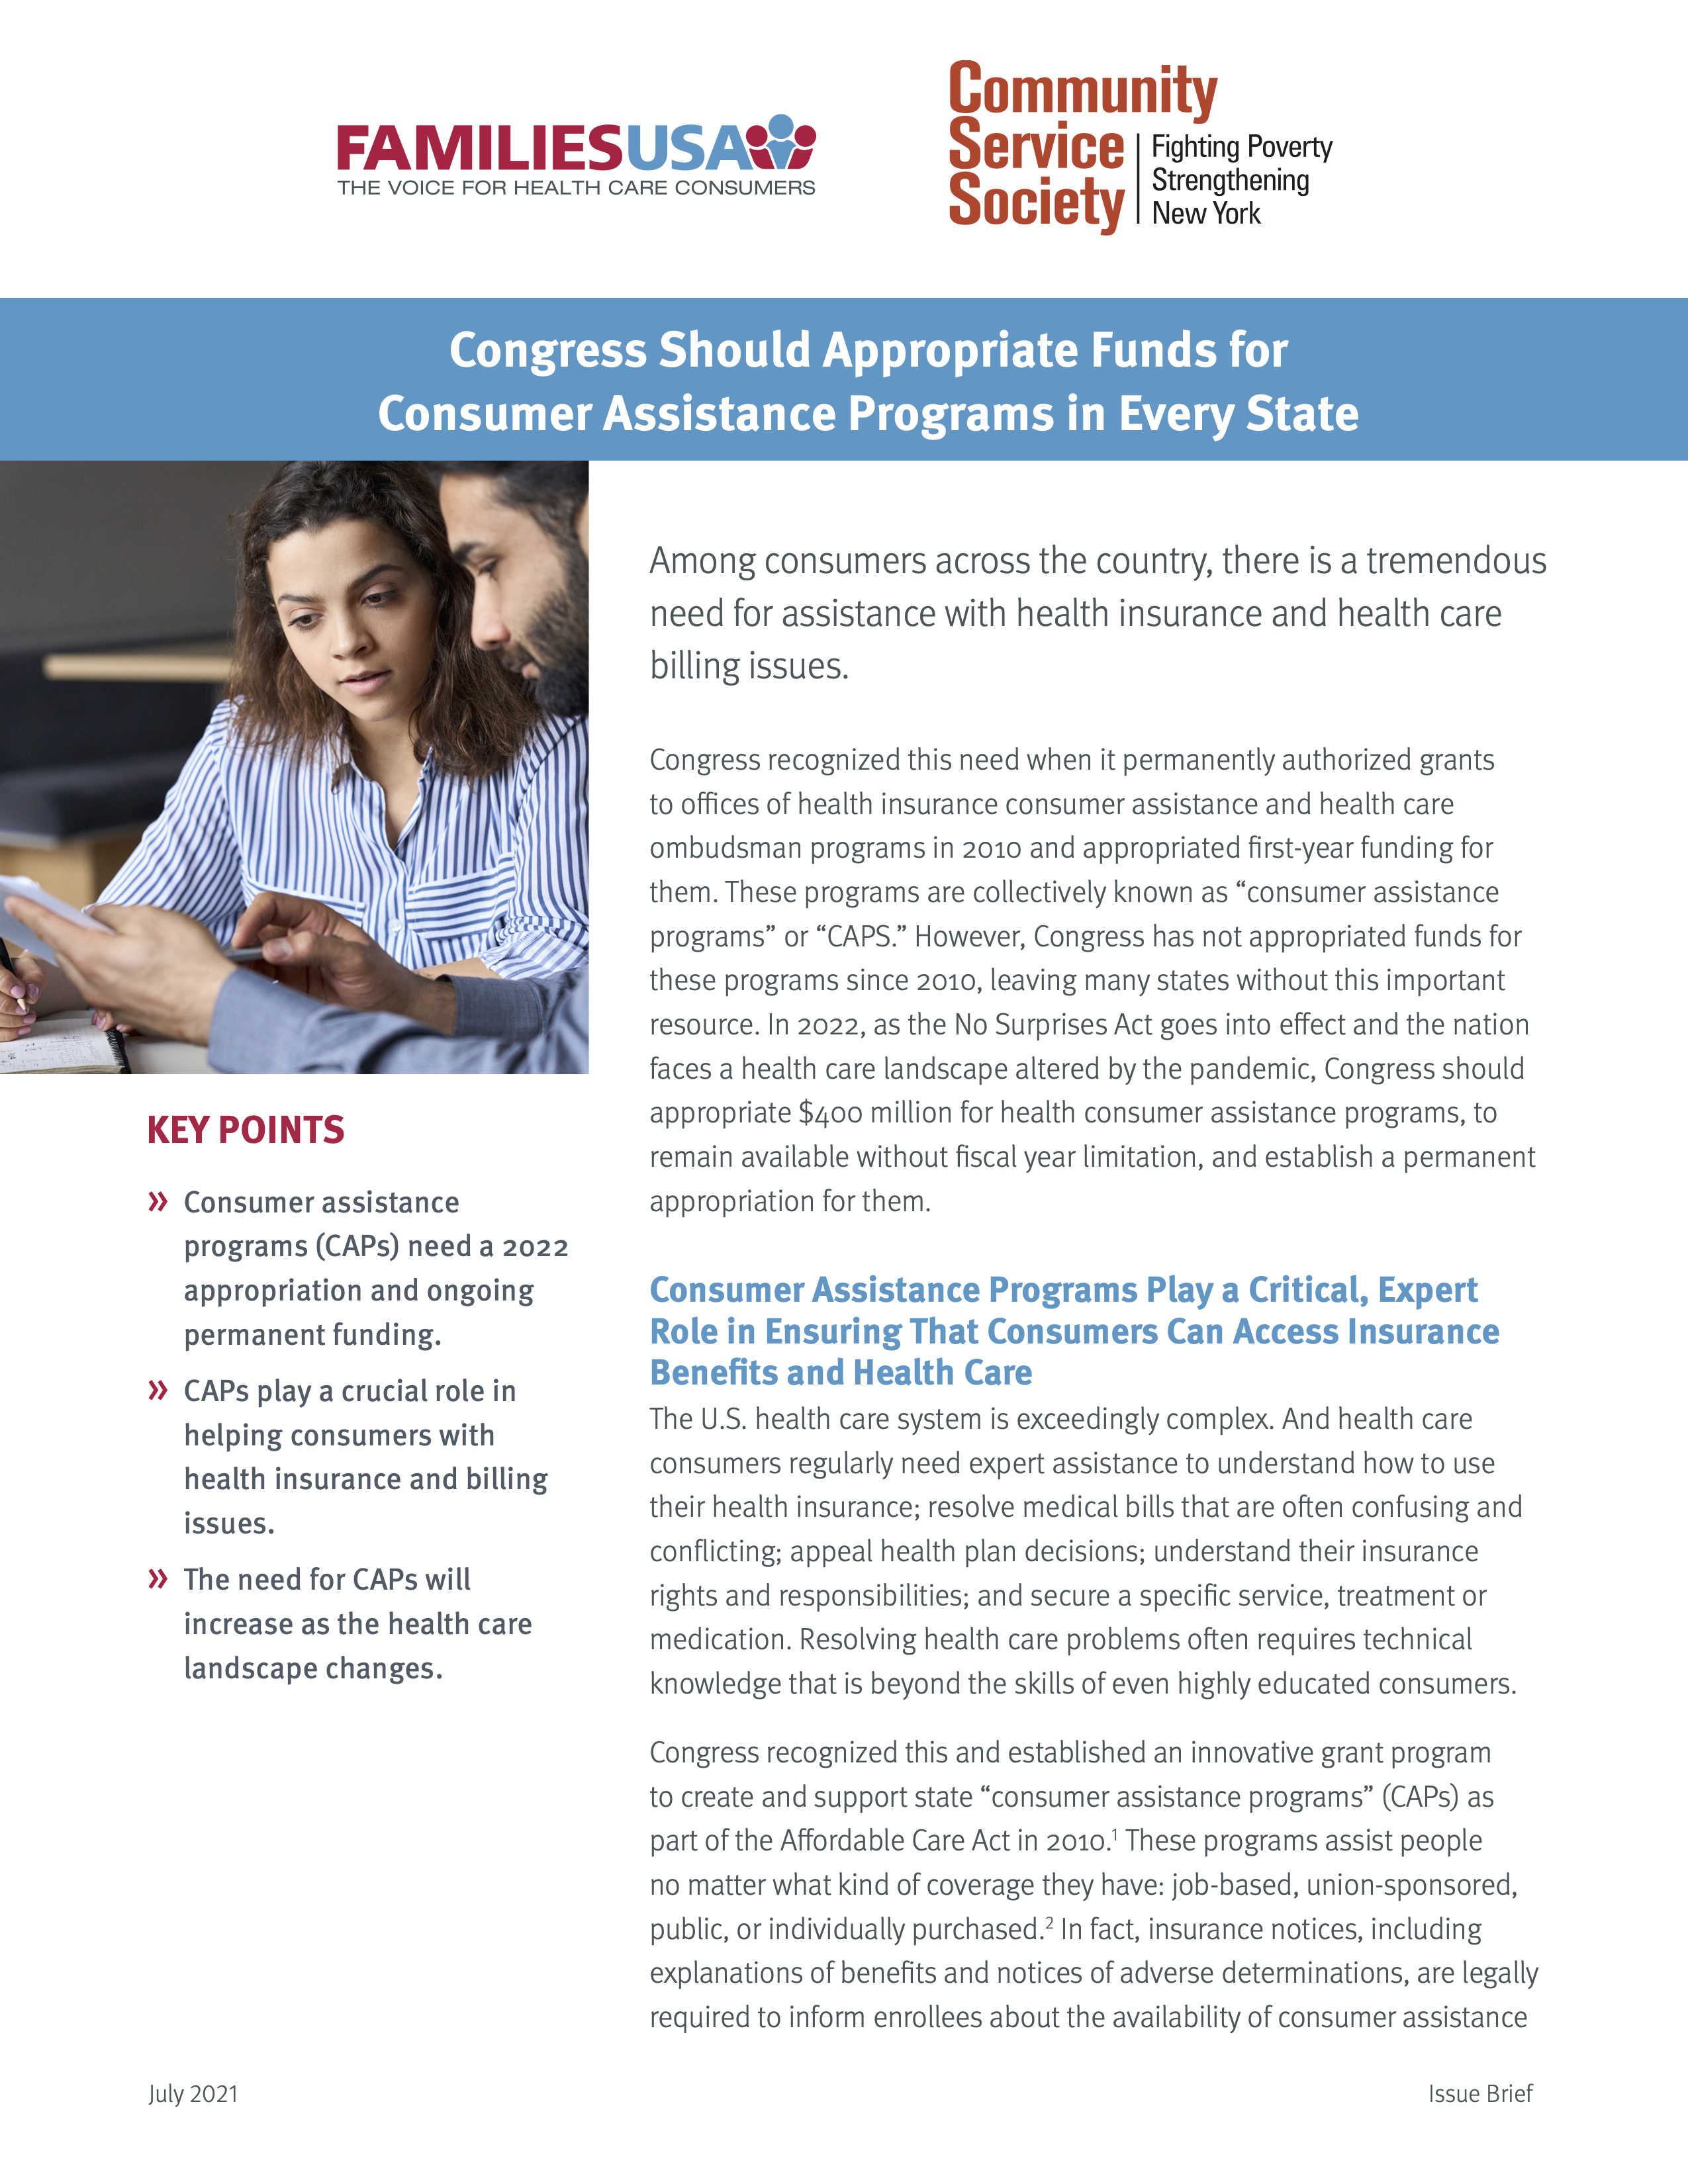 Congress Should Appropriate Funds for Consumer Assistance Programs in Every State